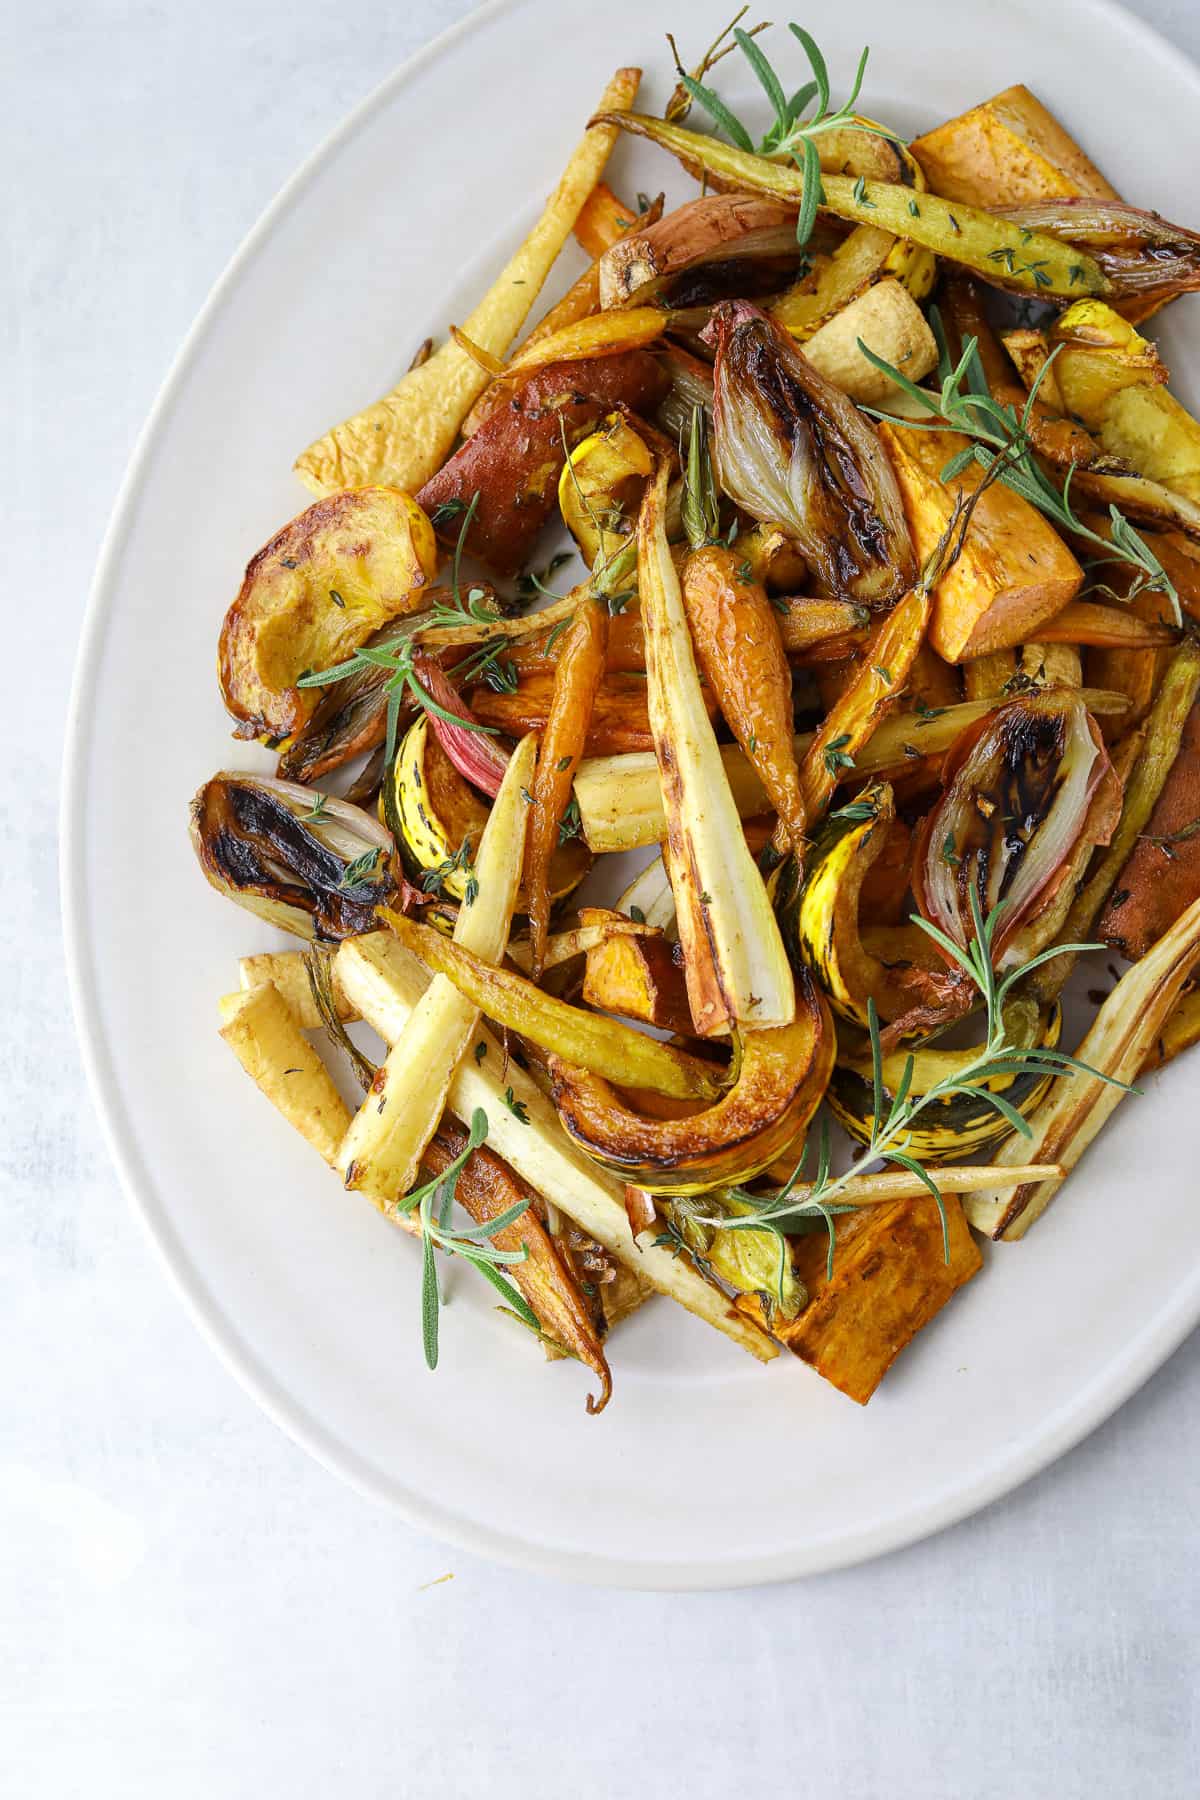 an oval platter filled with roasted root vegetables; carrots, parsnips, shallot, rosemary and thyme 